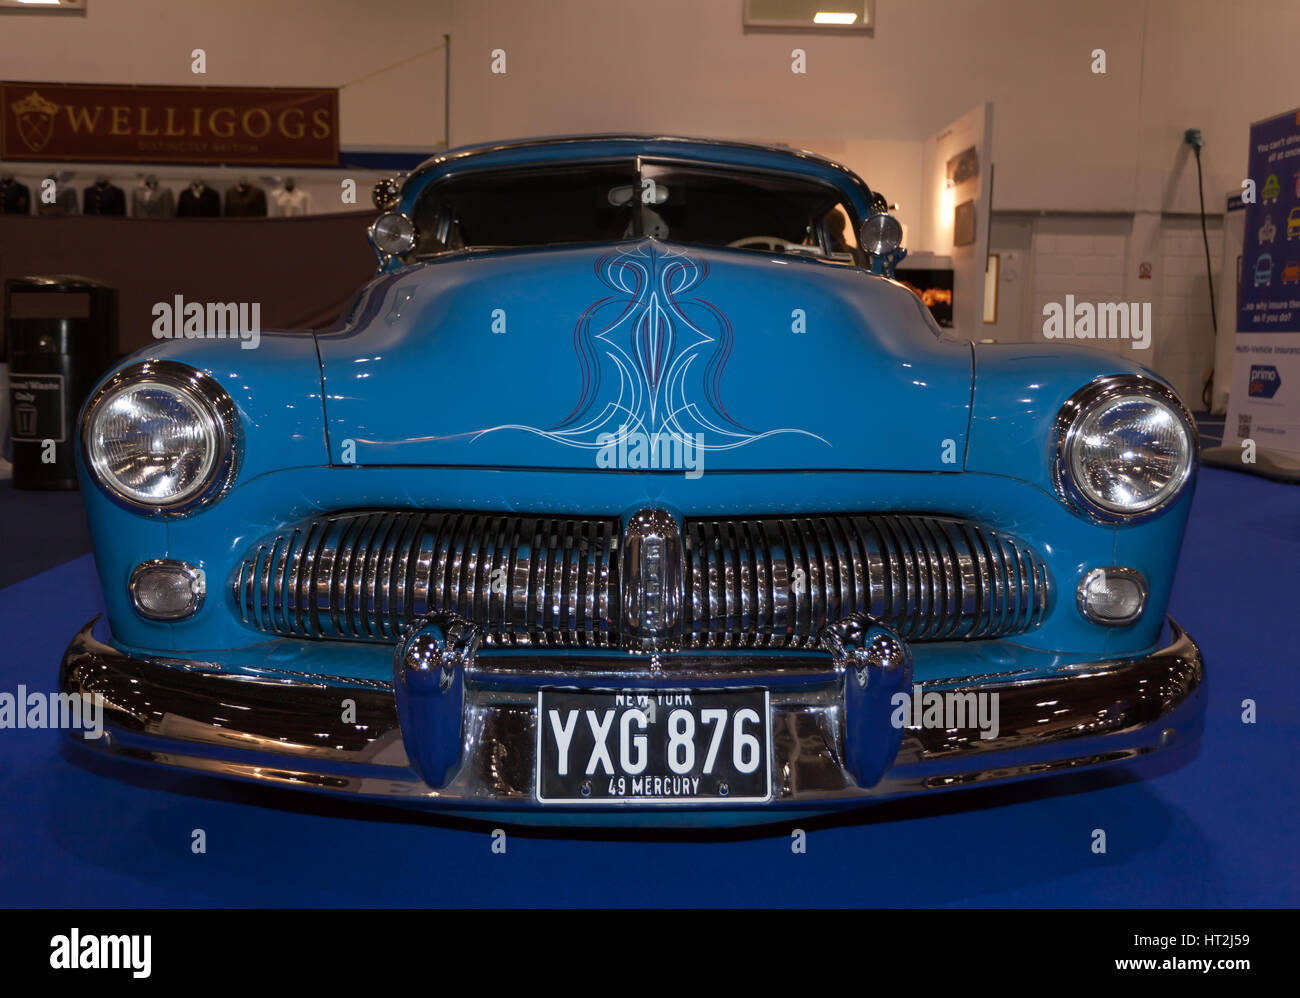 Front view of a 49 Mercury Funny Car, on display at the 2017 London Classic Car Show Stock Photo